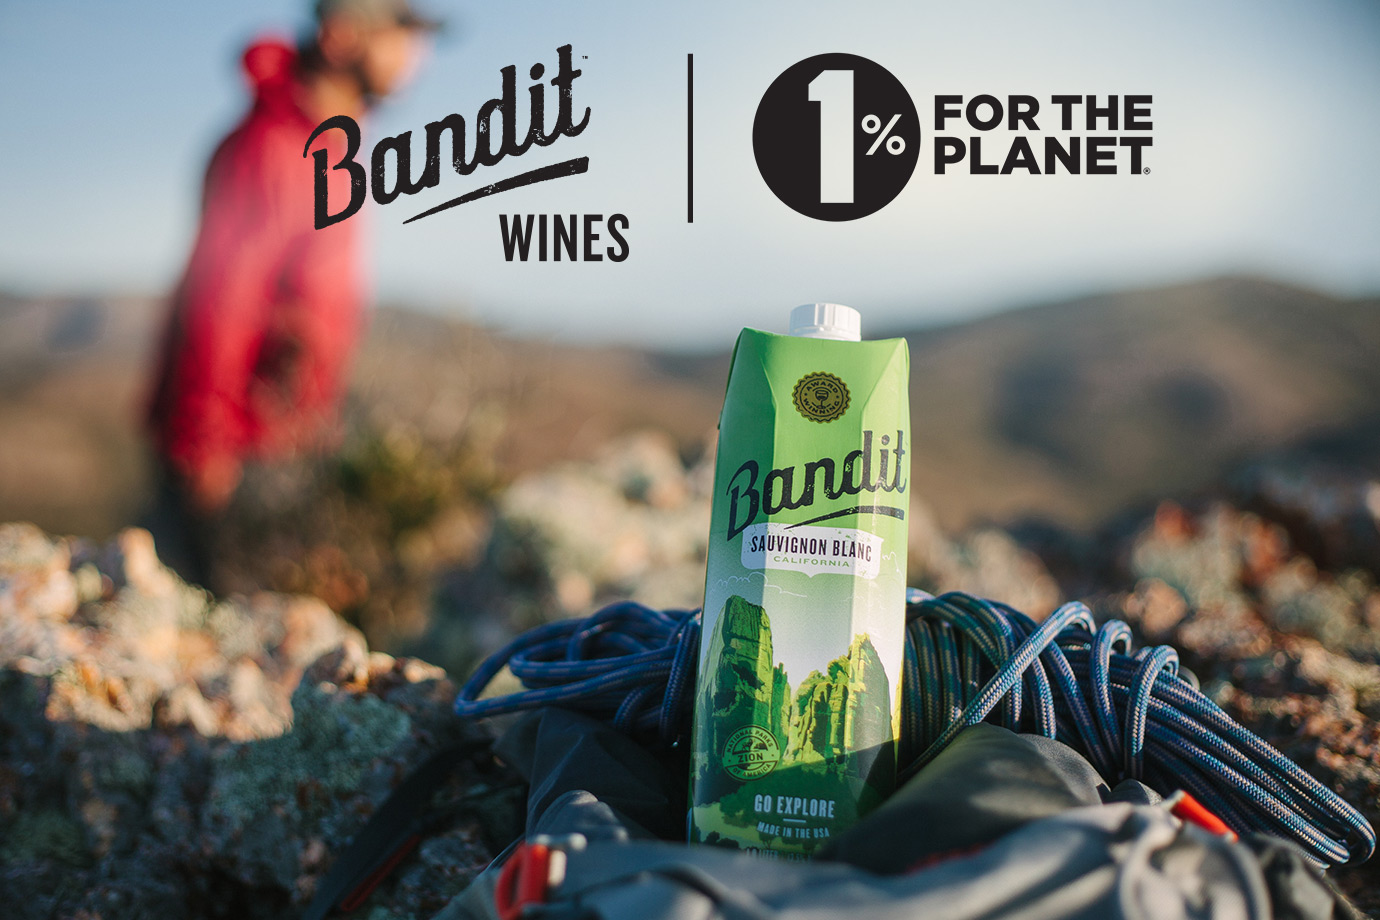 Bandit wines and 1% for the planet